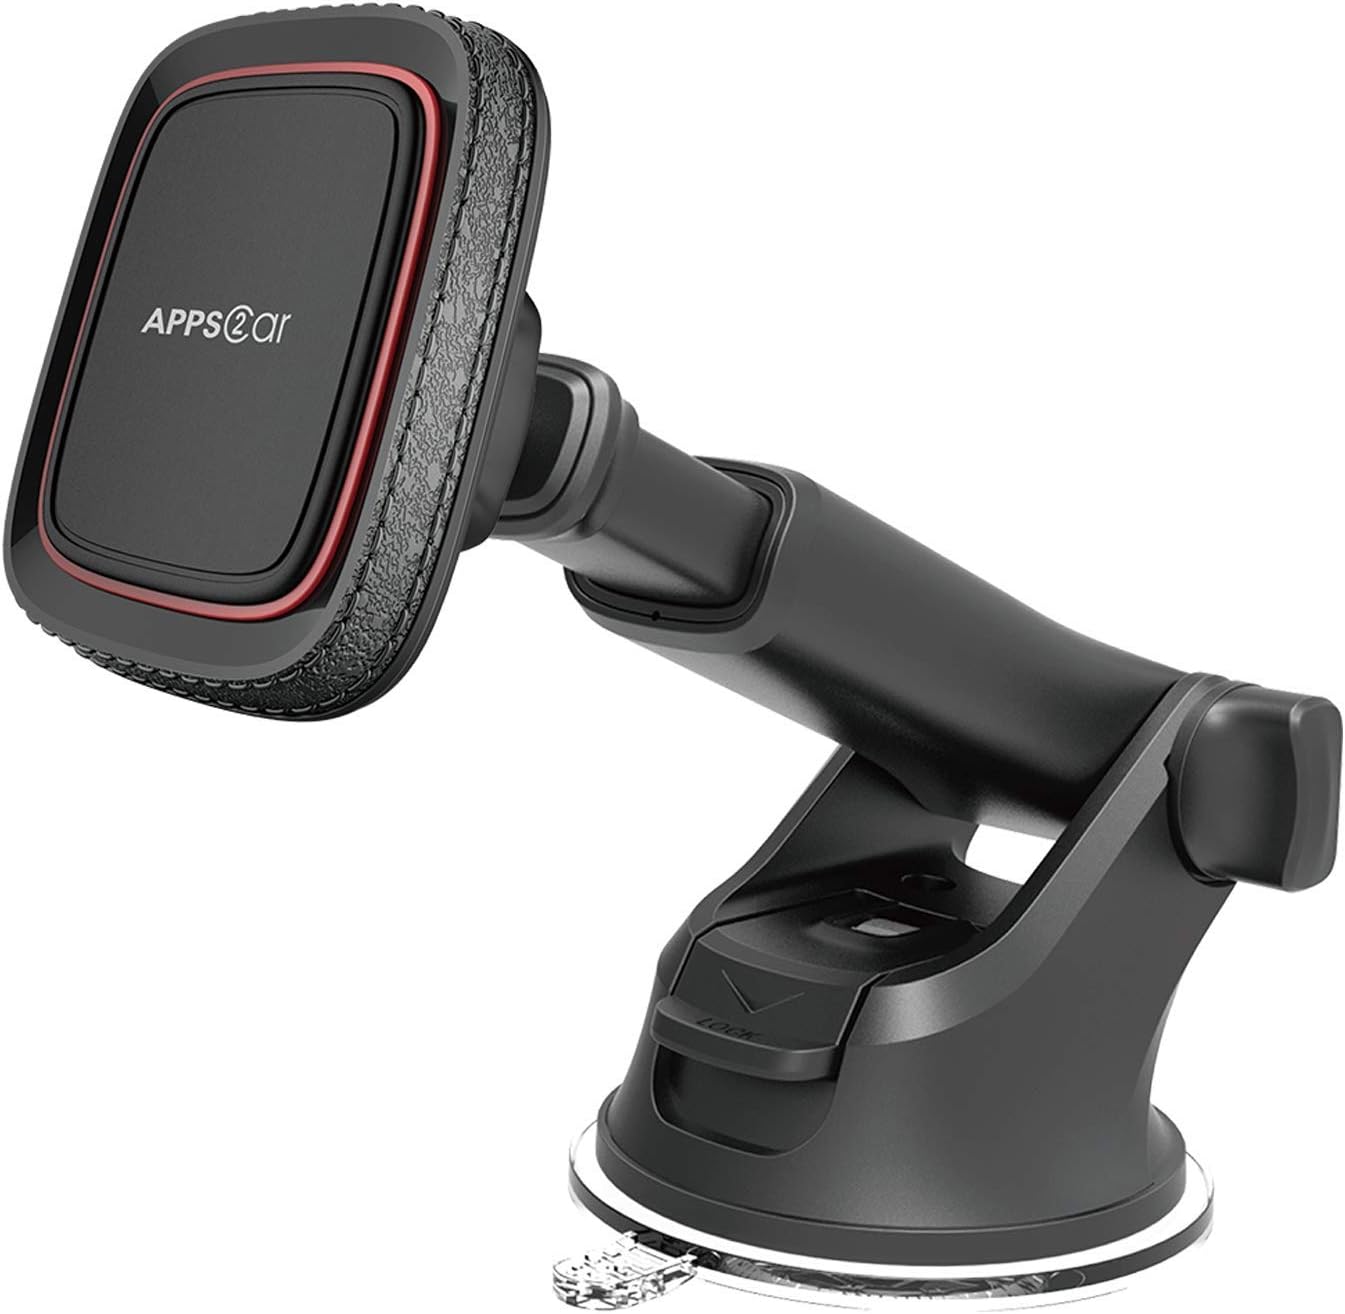 APPS2 Car Magnetic Phone Mount